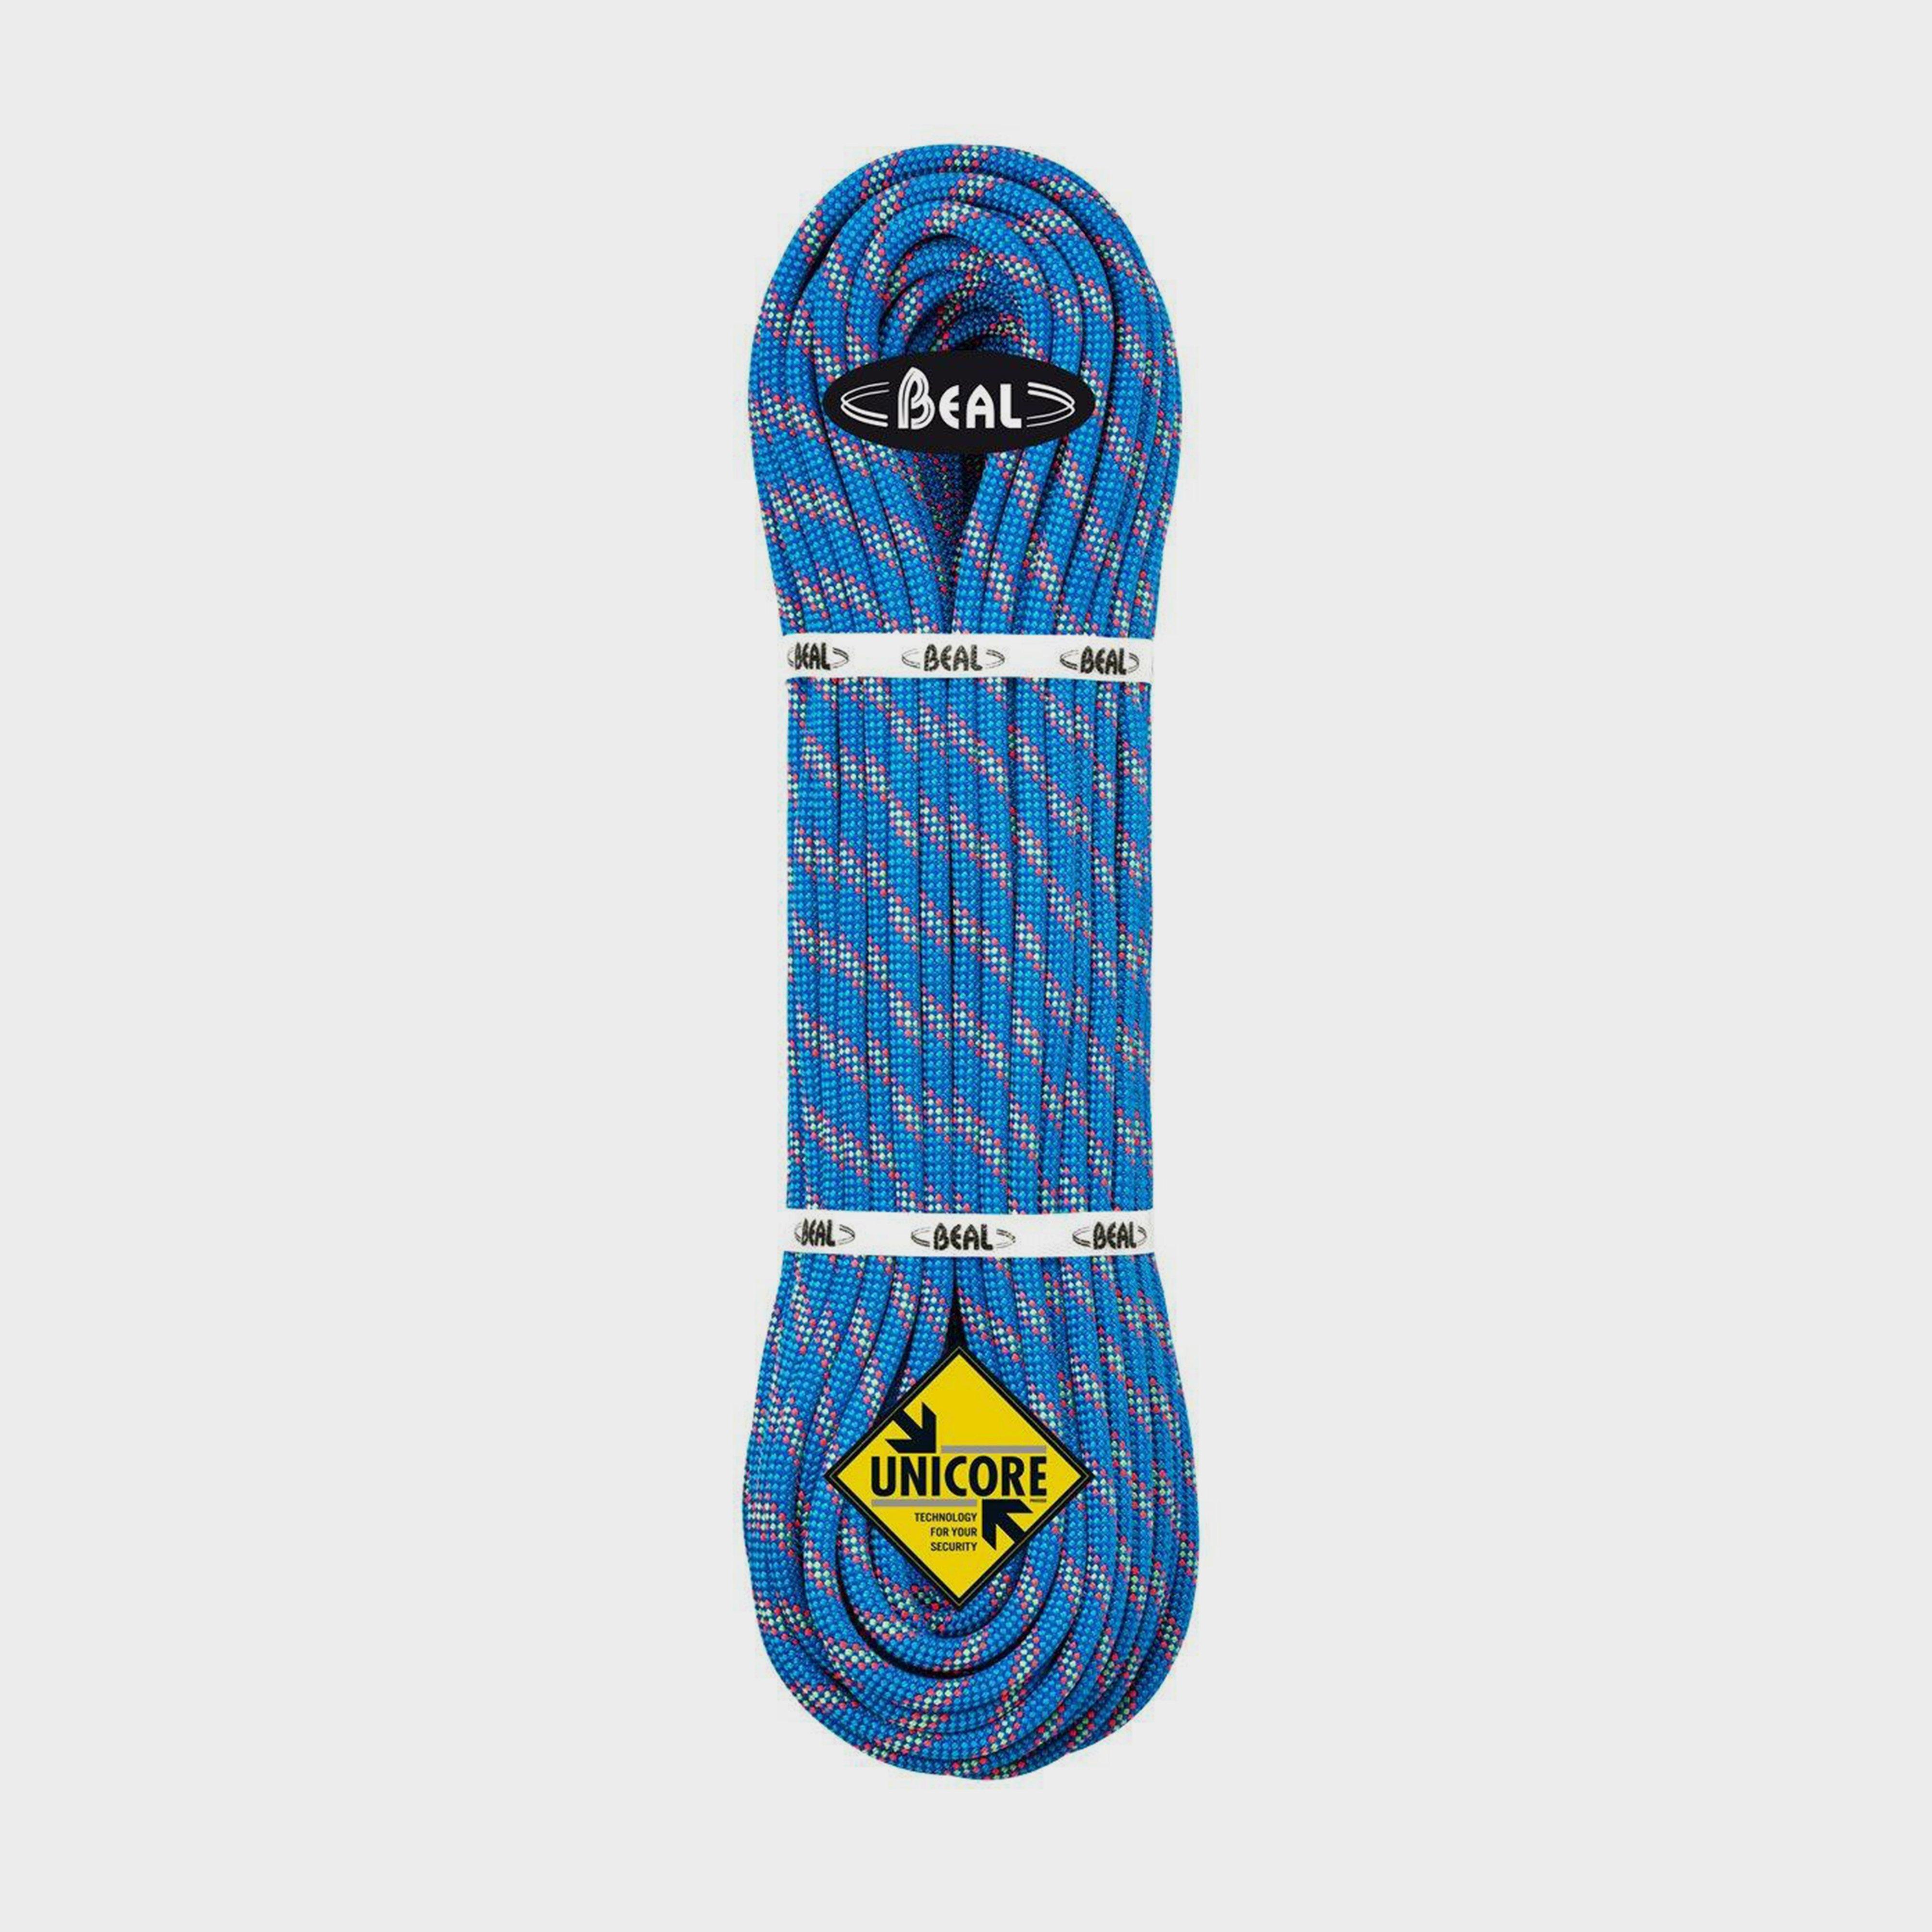 Booster Iii 9.7Mm Dry Cover Climbing Rope (70M) - Blue, Blue